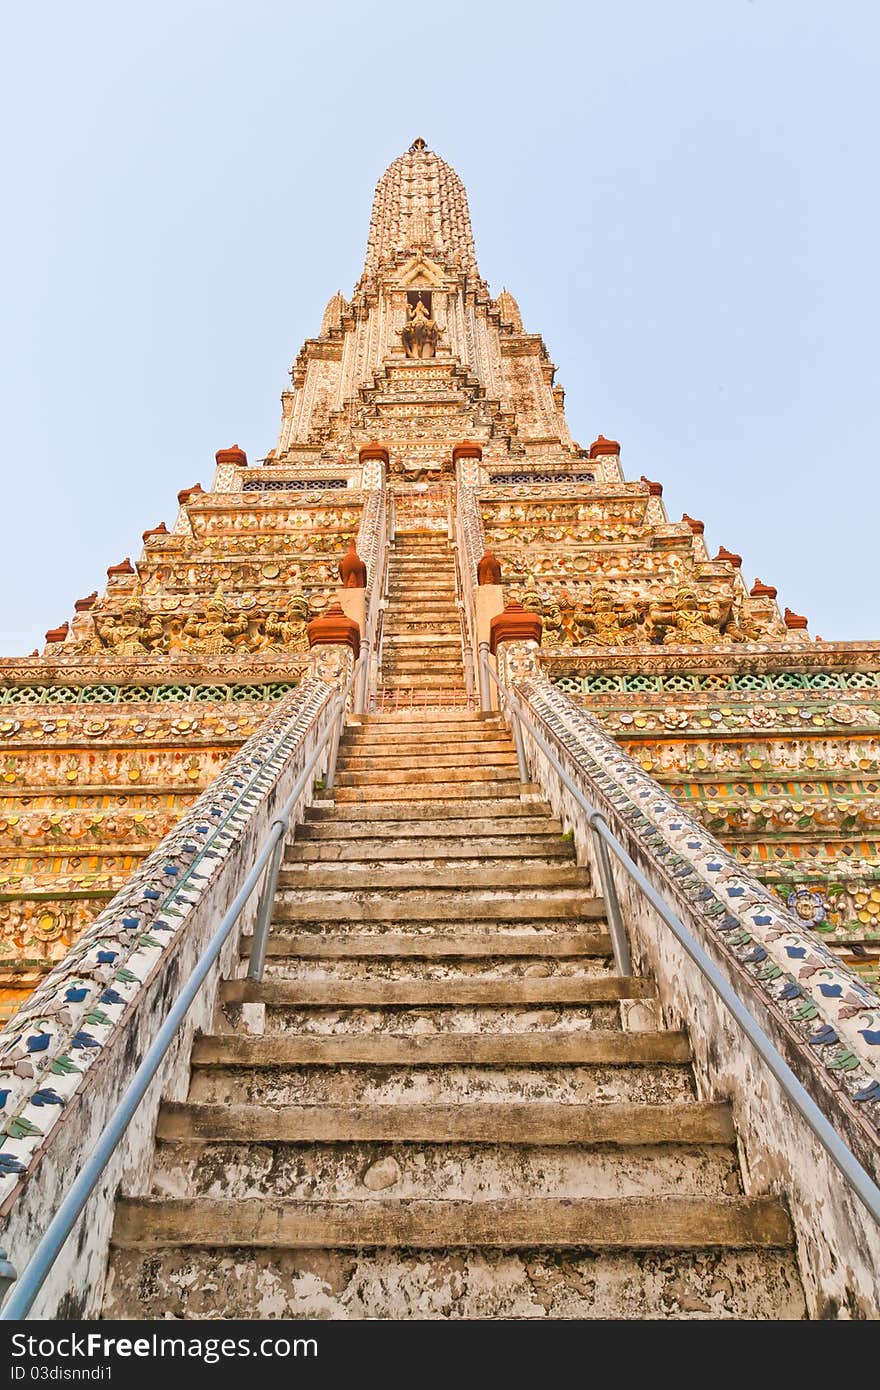 Stairs to the summit of the tallest pagoda. Stairs to the summit of the tallest pagoda